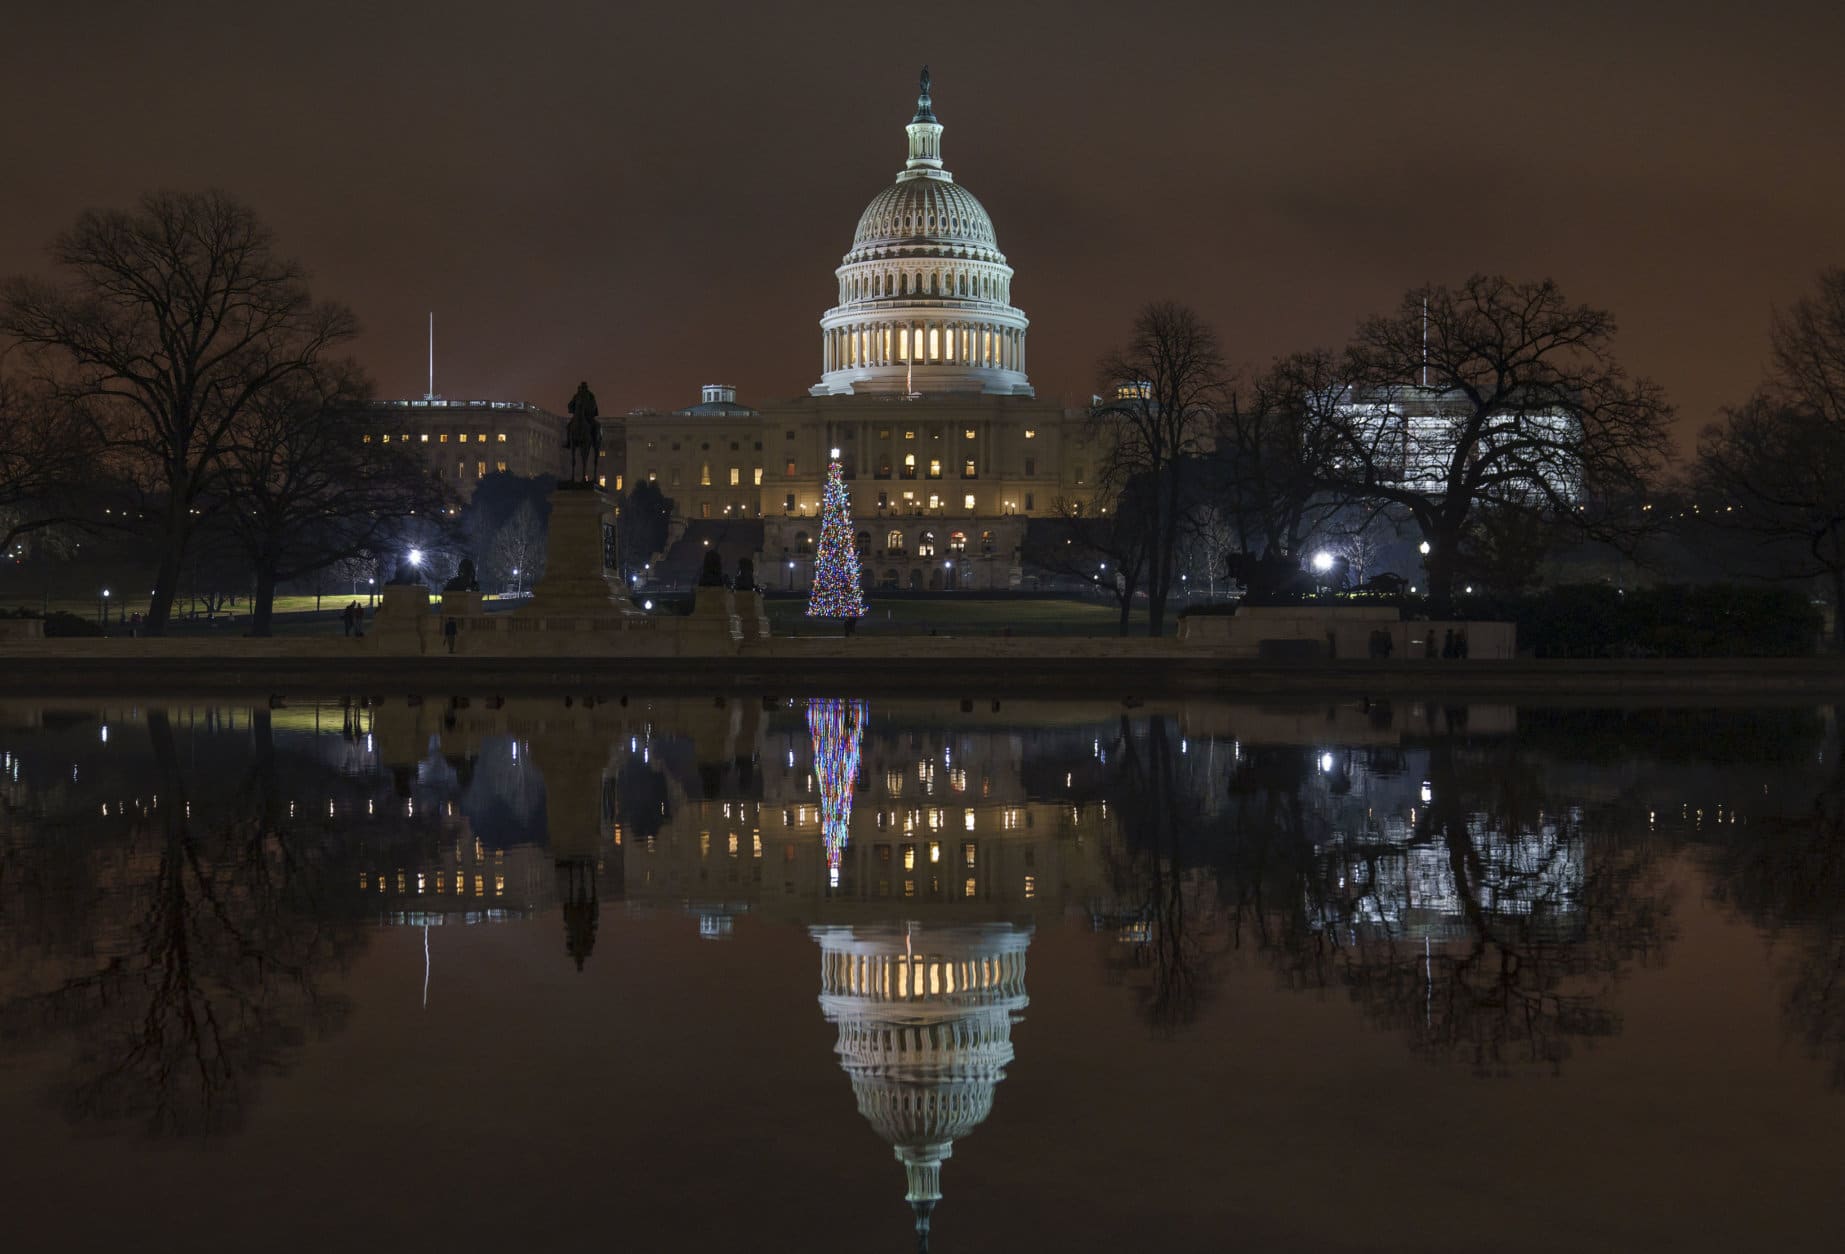 The Capitol is mirrored in the Reflecting Pool in Washington, as a partial government shutdown heads into a second week, Friday night, Dec. 28, 2018. Both chambers of Congress are gone, likely leaving the impasse till next week when the Democrats take control of the House of Representatives. (AP Photo/J. Scott Applewhite)